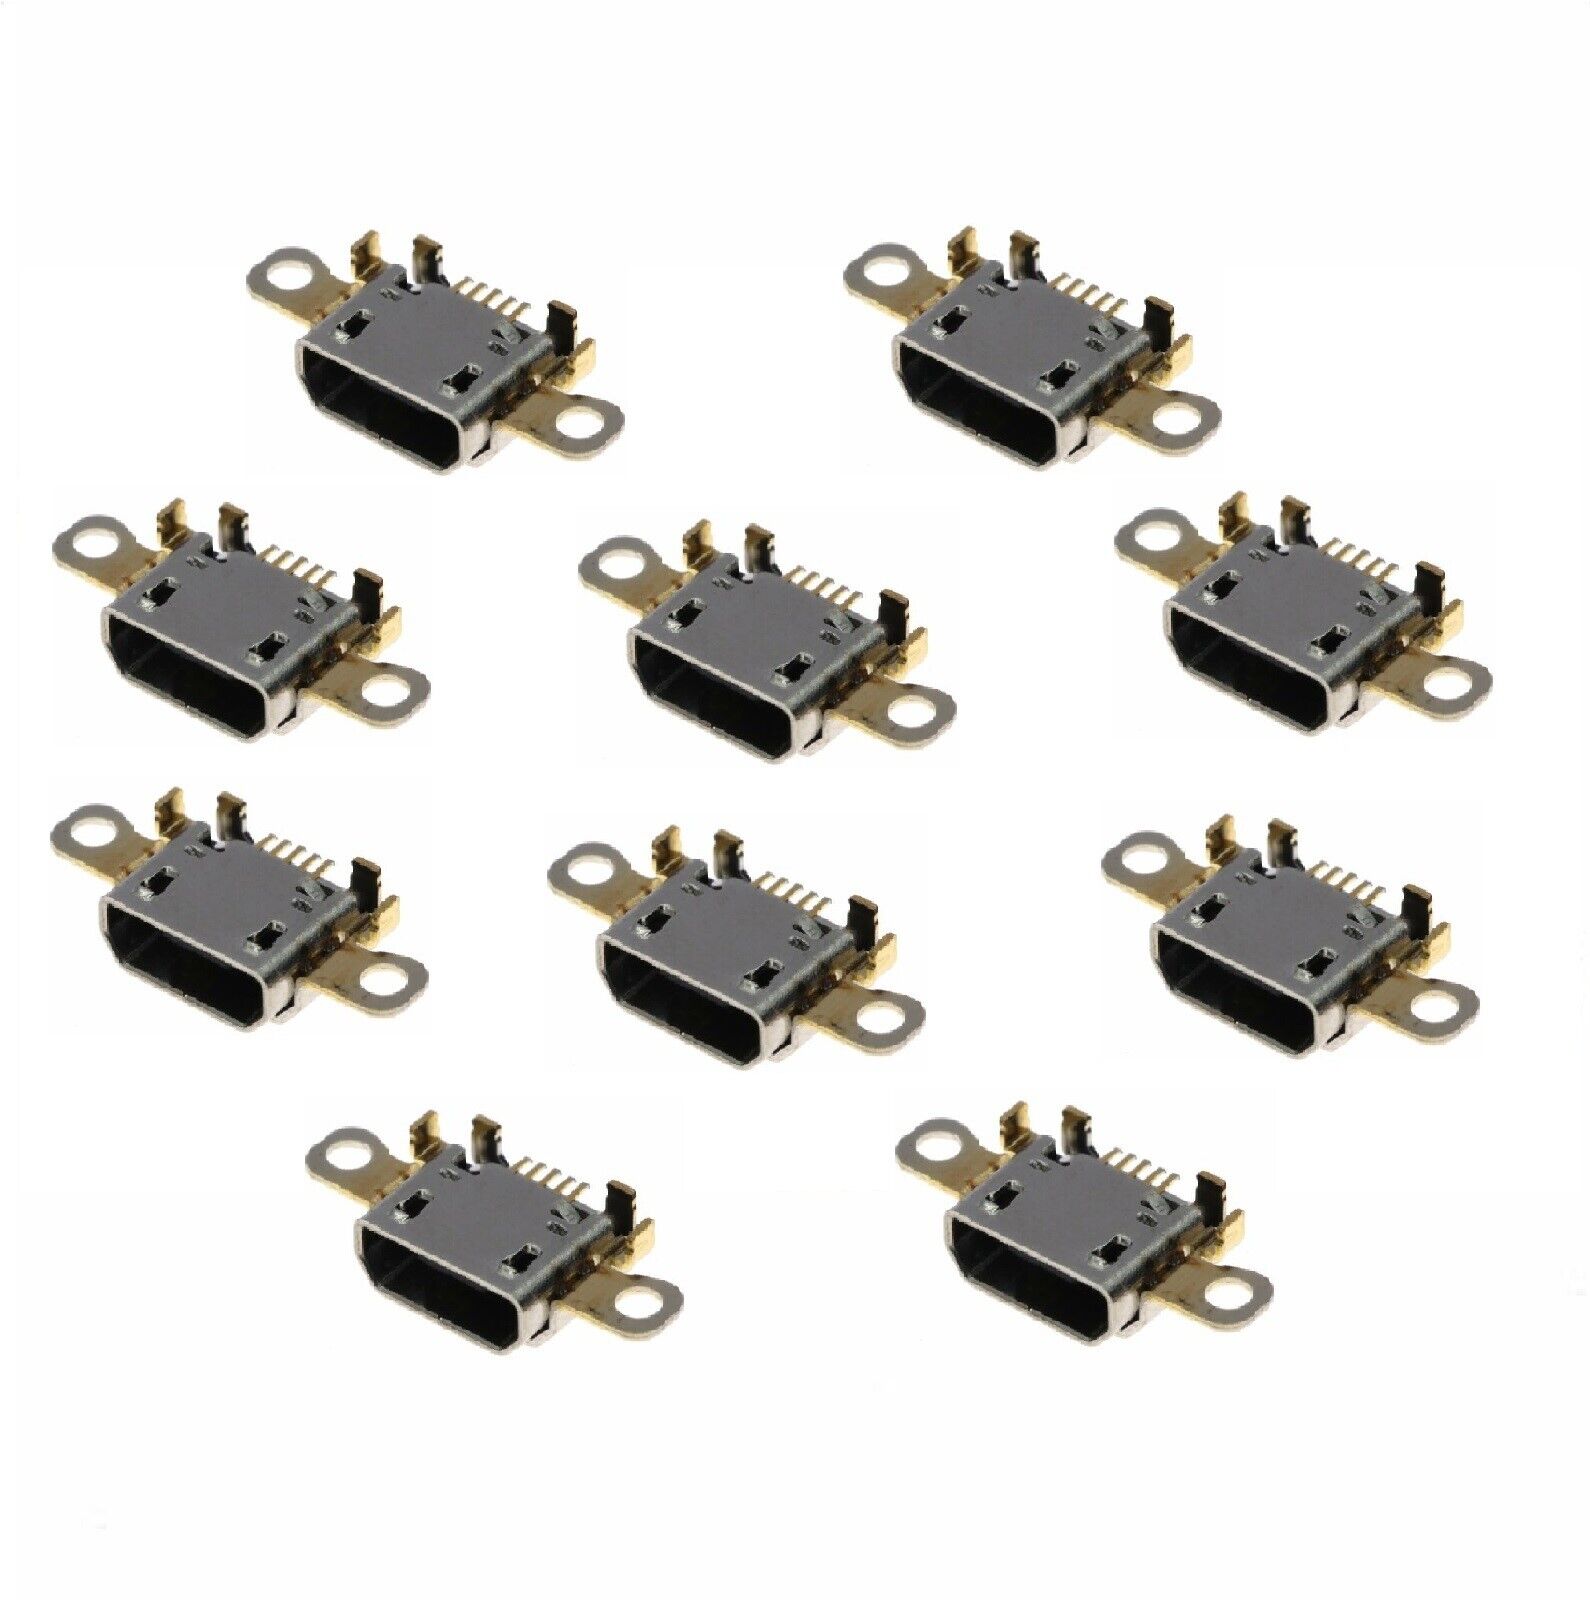 10 x Micro USB Charge Port Sync For Amazon Kindle Fire 7 SR043KL 2017 7th Tablet Unbranded/Generic Does not apply - фотография #2